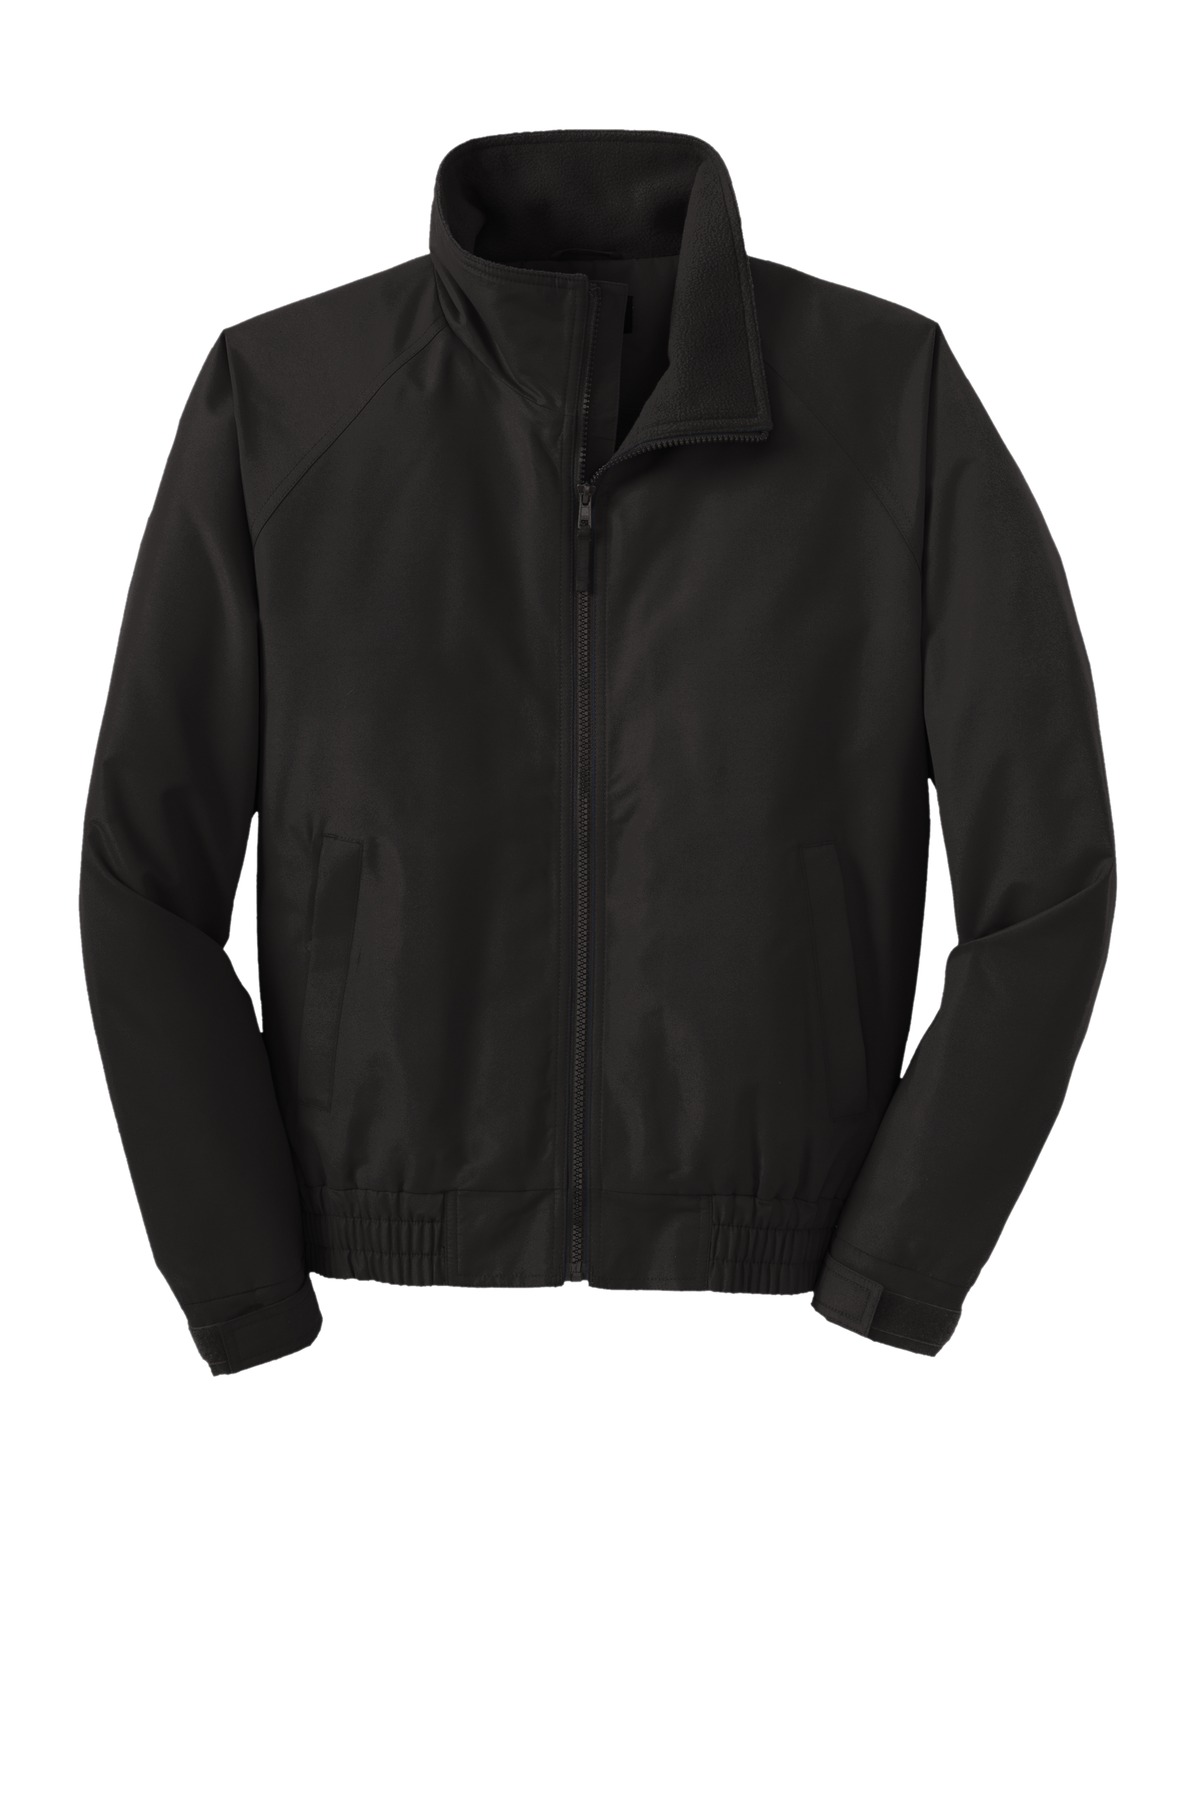 Port Authority Lightweight Charger Jacket-XL (True Black) - image 5 of 5